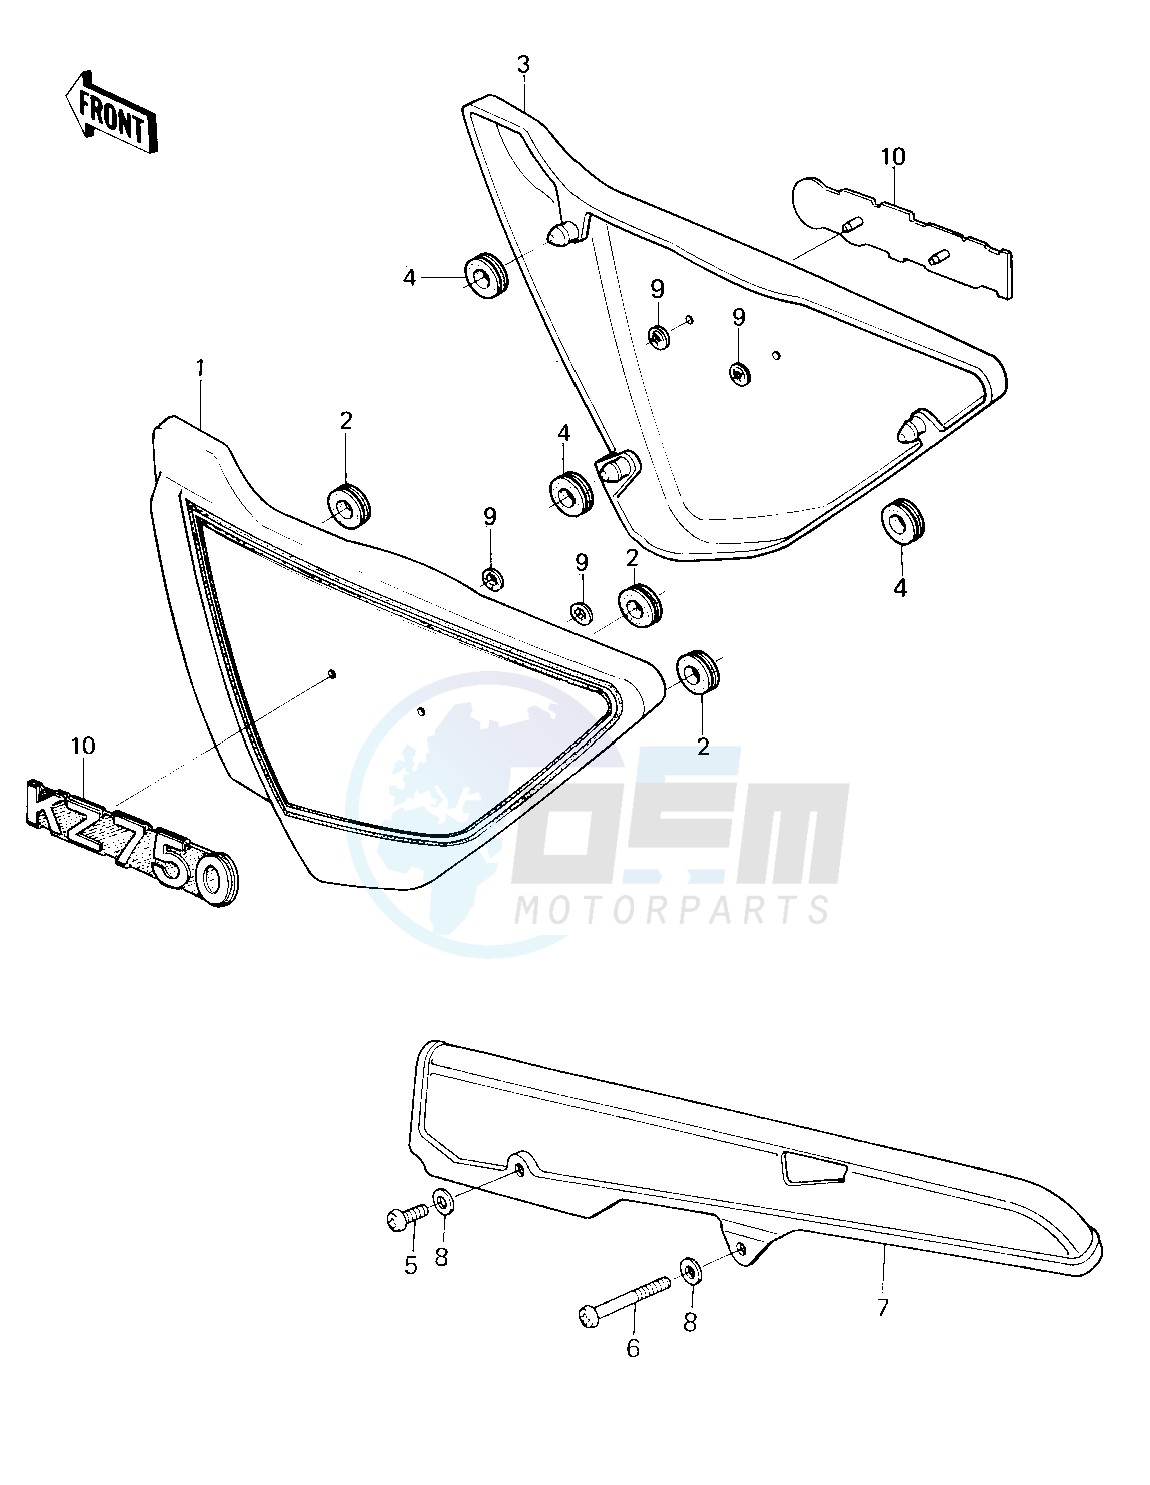 SIDE COVERS_CHAIN COVER -- 80 KZY 50-E1- - blueprint